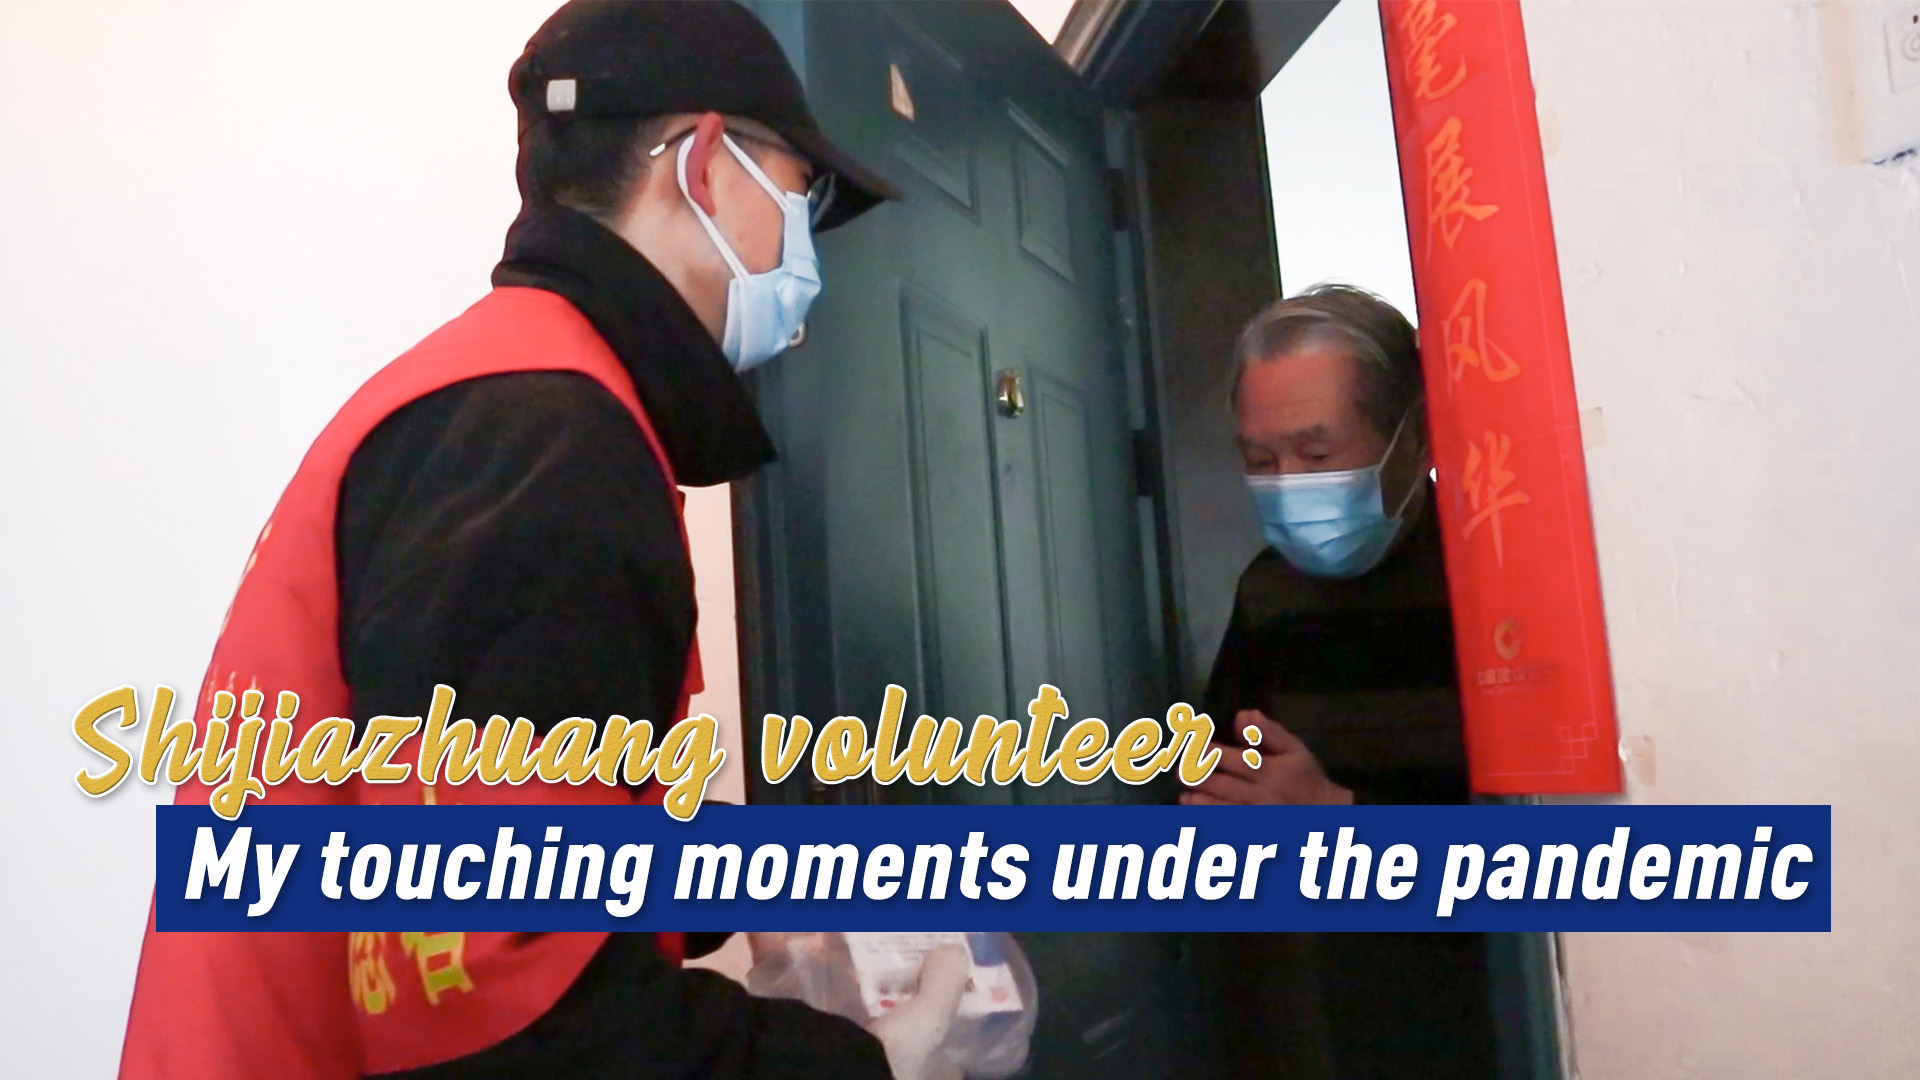 Shijiazhuang volunteer: My touching moments under the pandemic